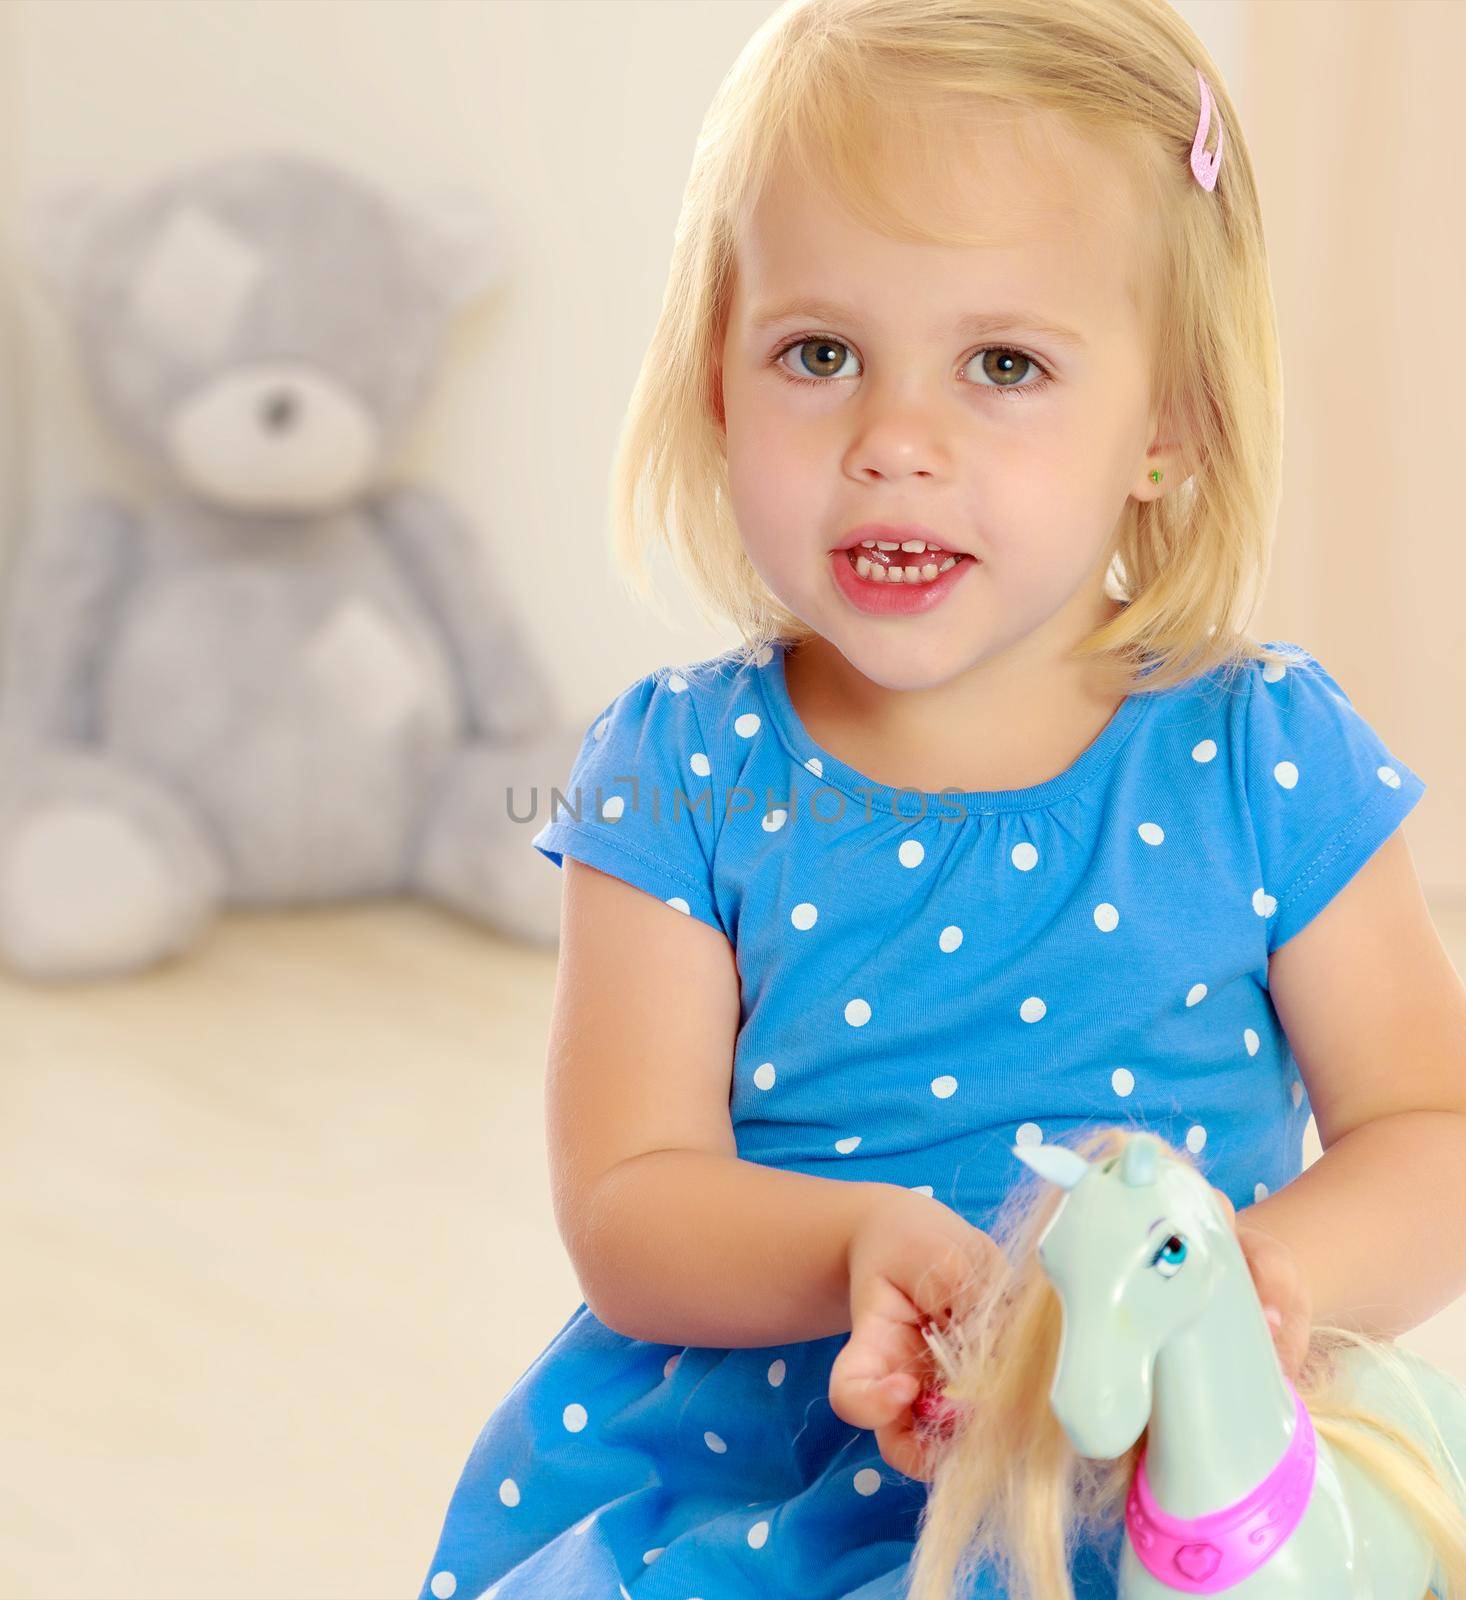 Cute little blonde girl playing with a toy horse. Girl wearing a blue dress with polka dots.In the background children's room where the sitting Teddy bear.